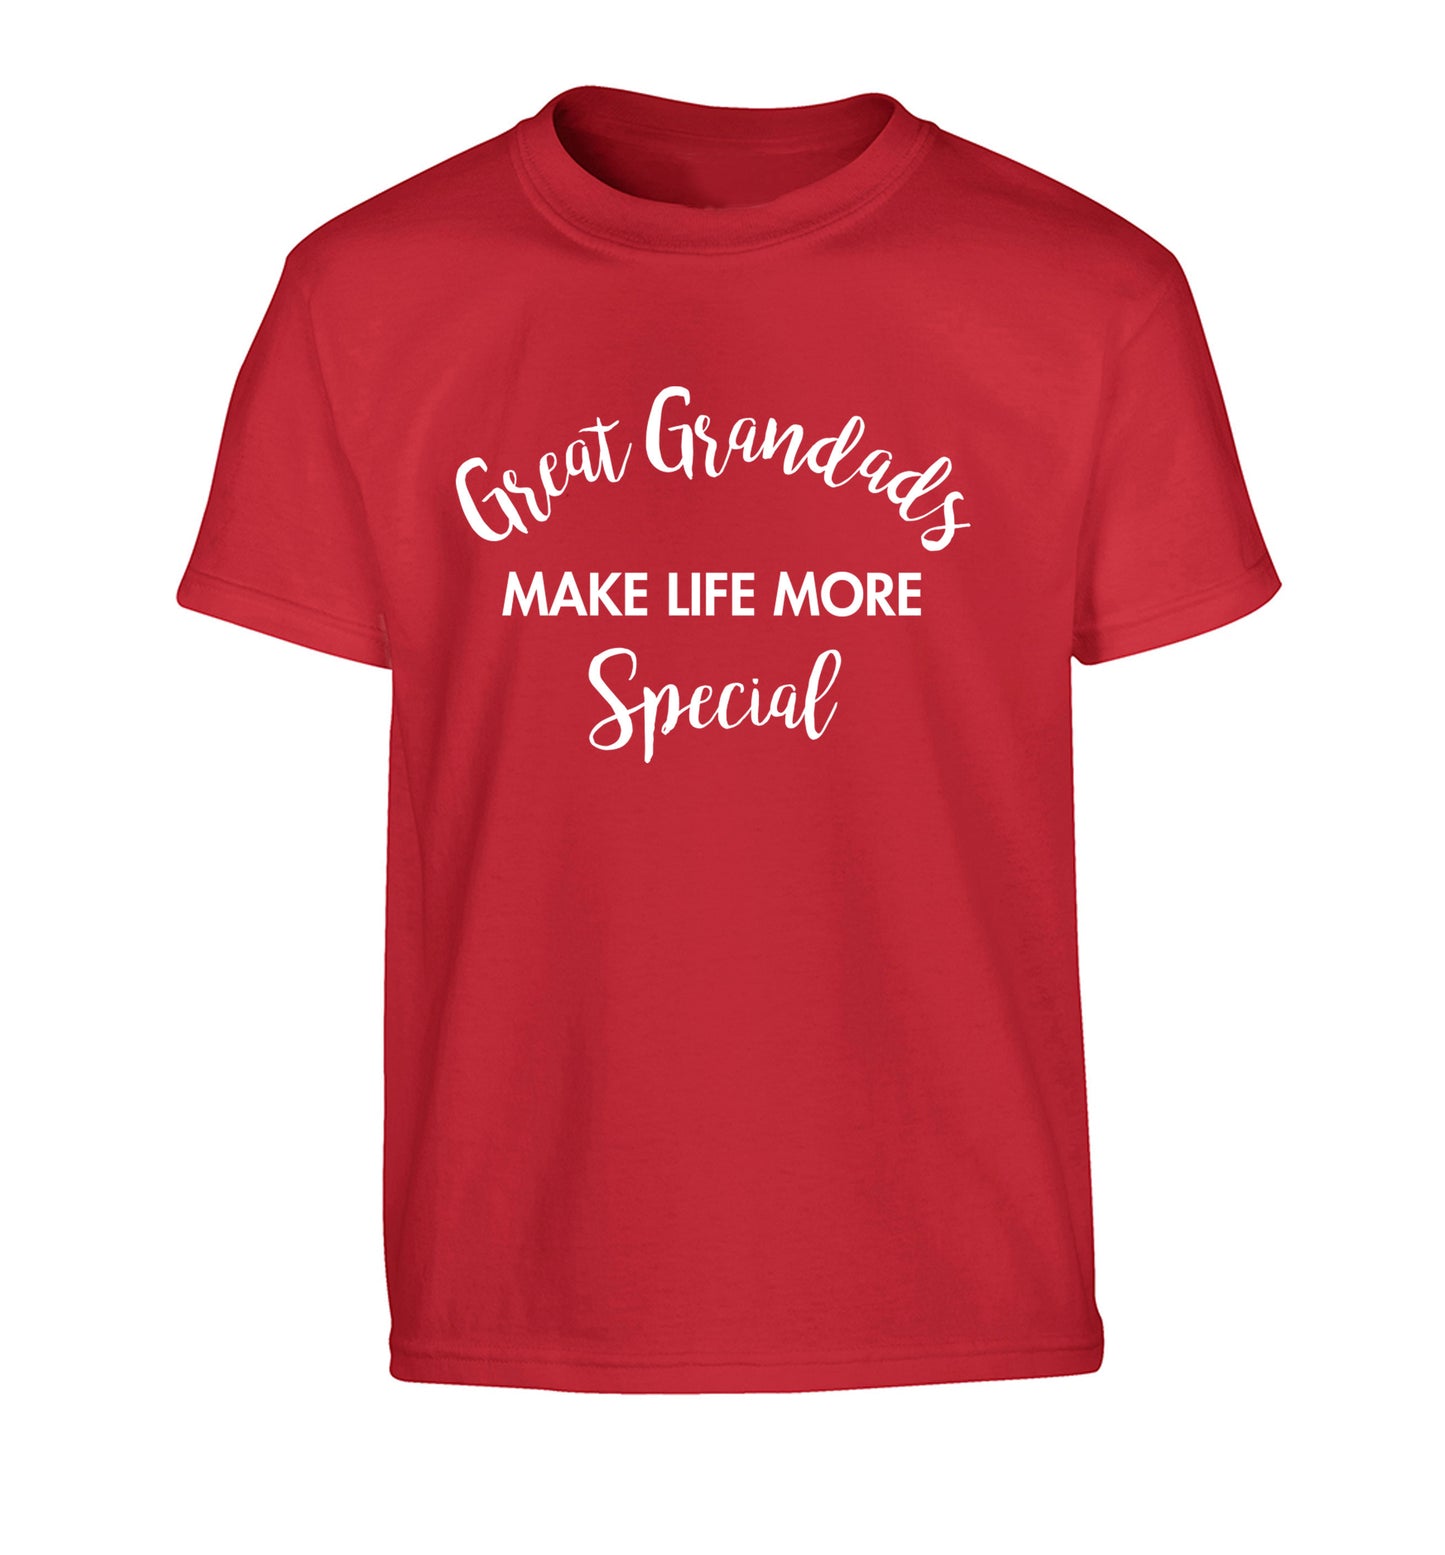 Great Grandads make life more special Children's red Tshirt 12-14 Years